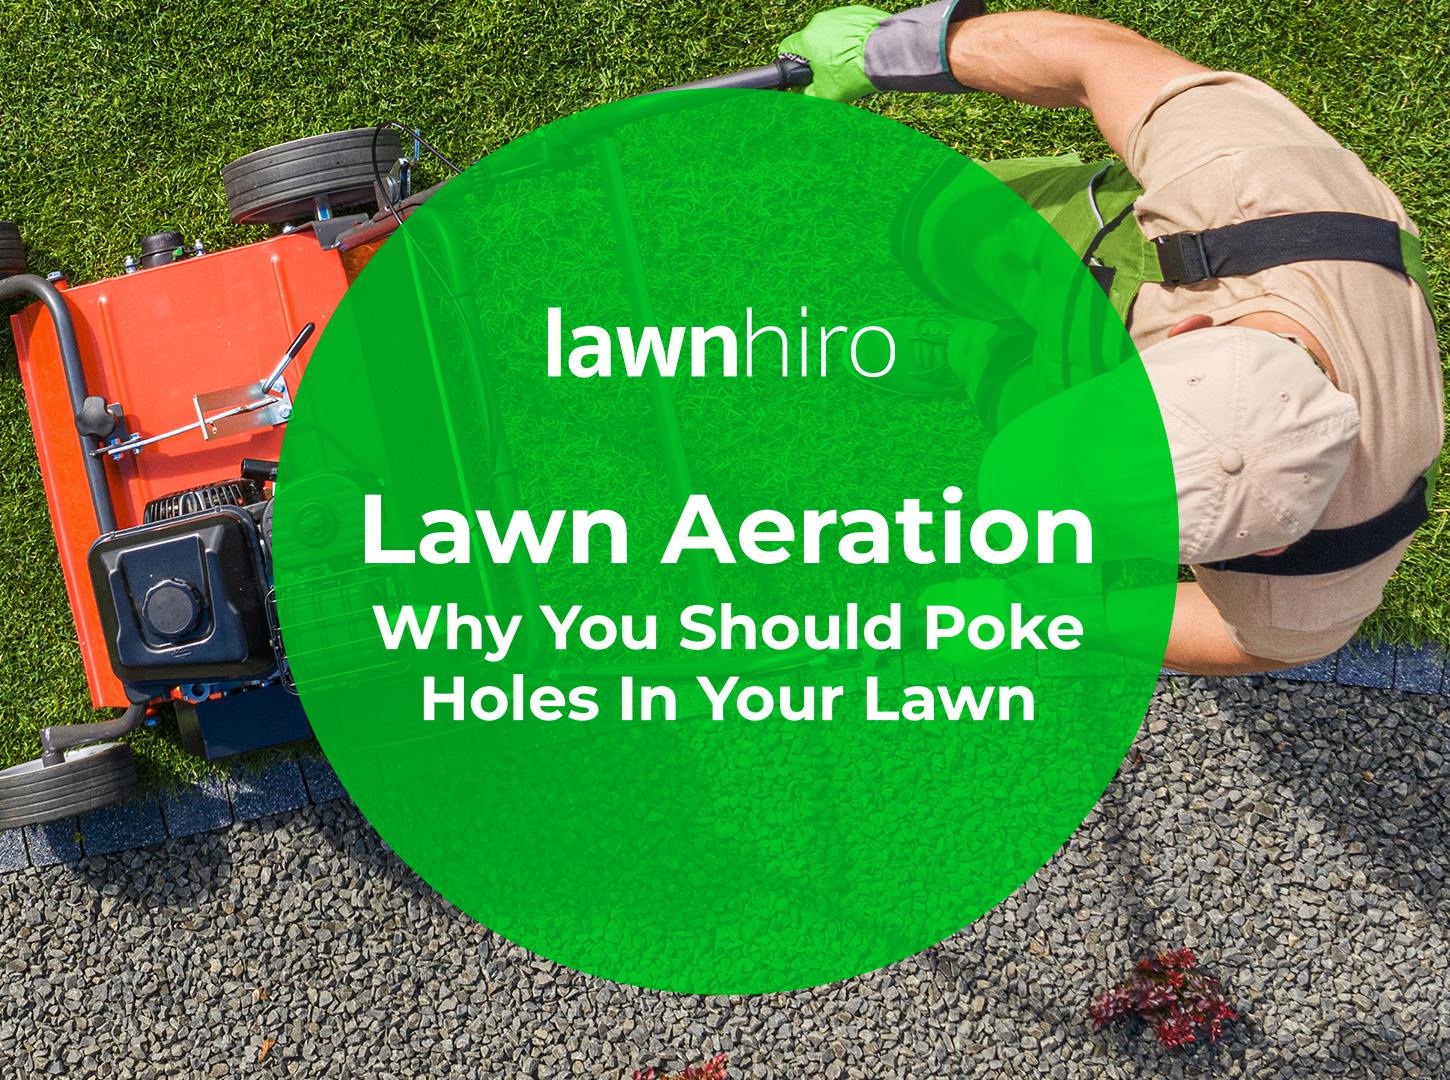 Featured image for “Lawn Aeration: Why You Should Poke Holes In Your Lawn”